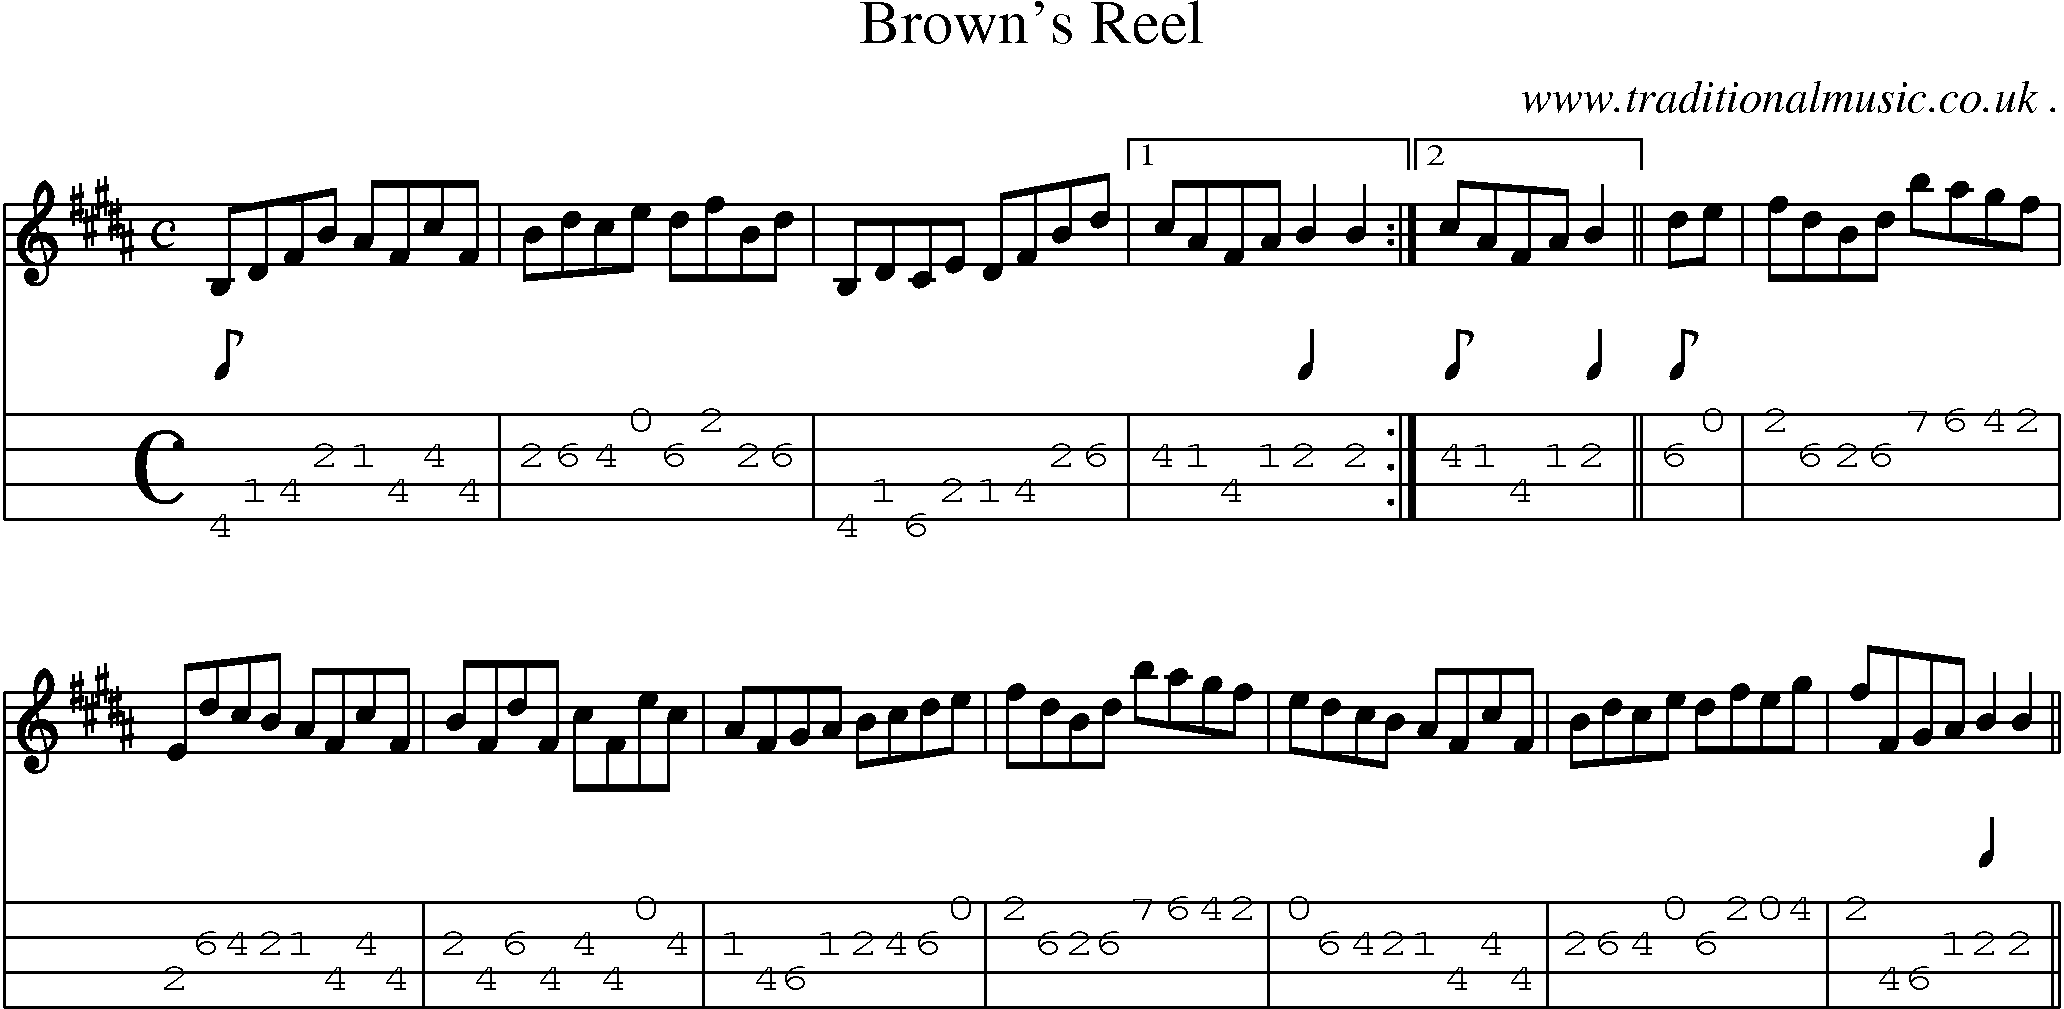 Sheet-music  score, Chords and Mandolin Tabs for Browns Reel